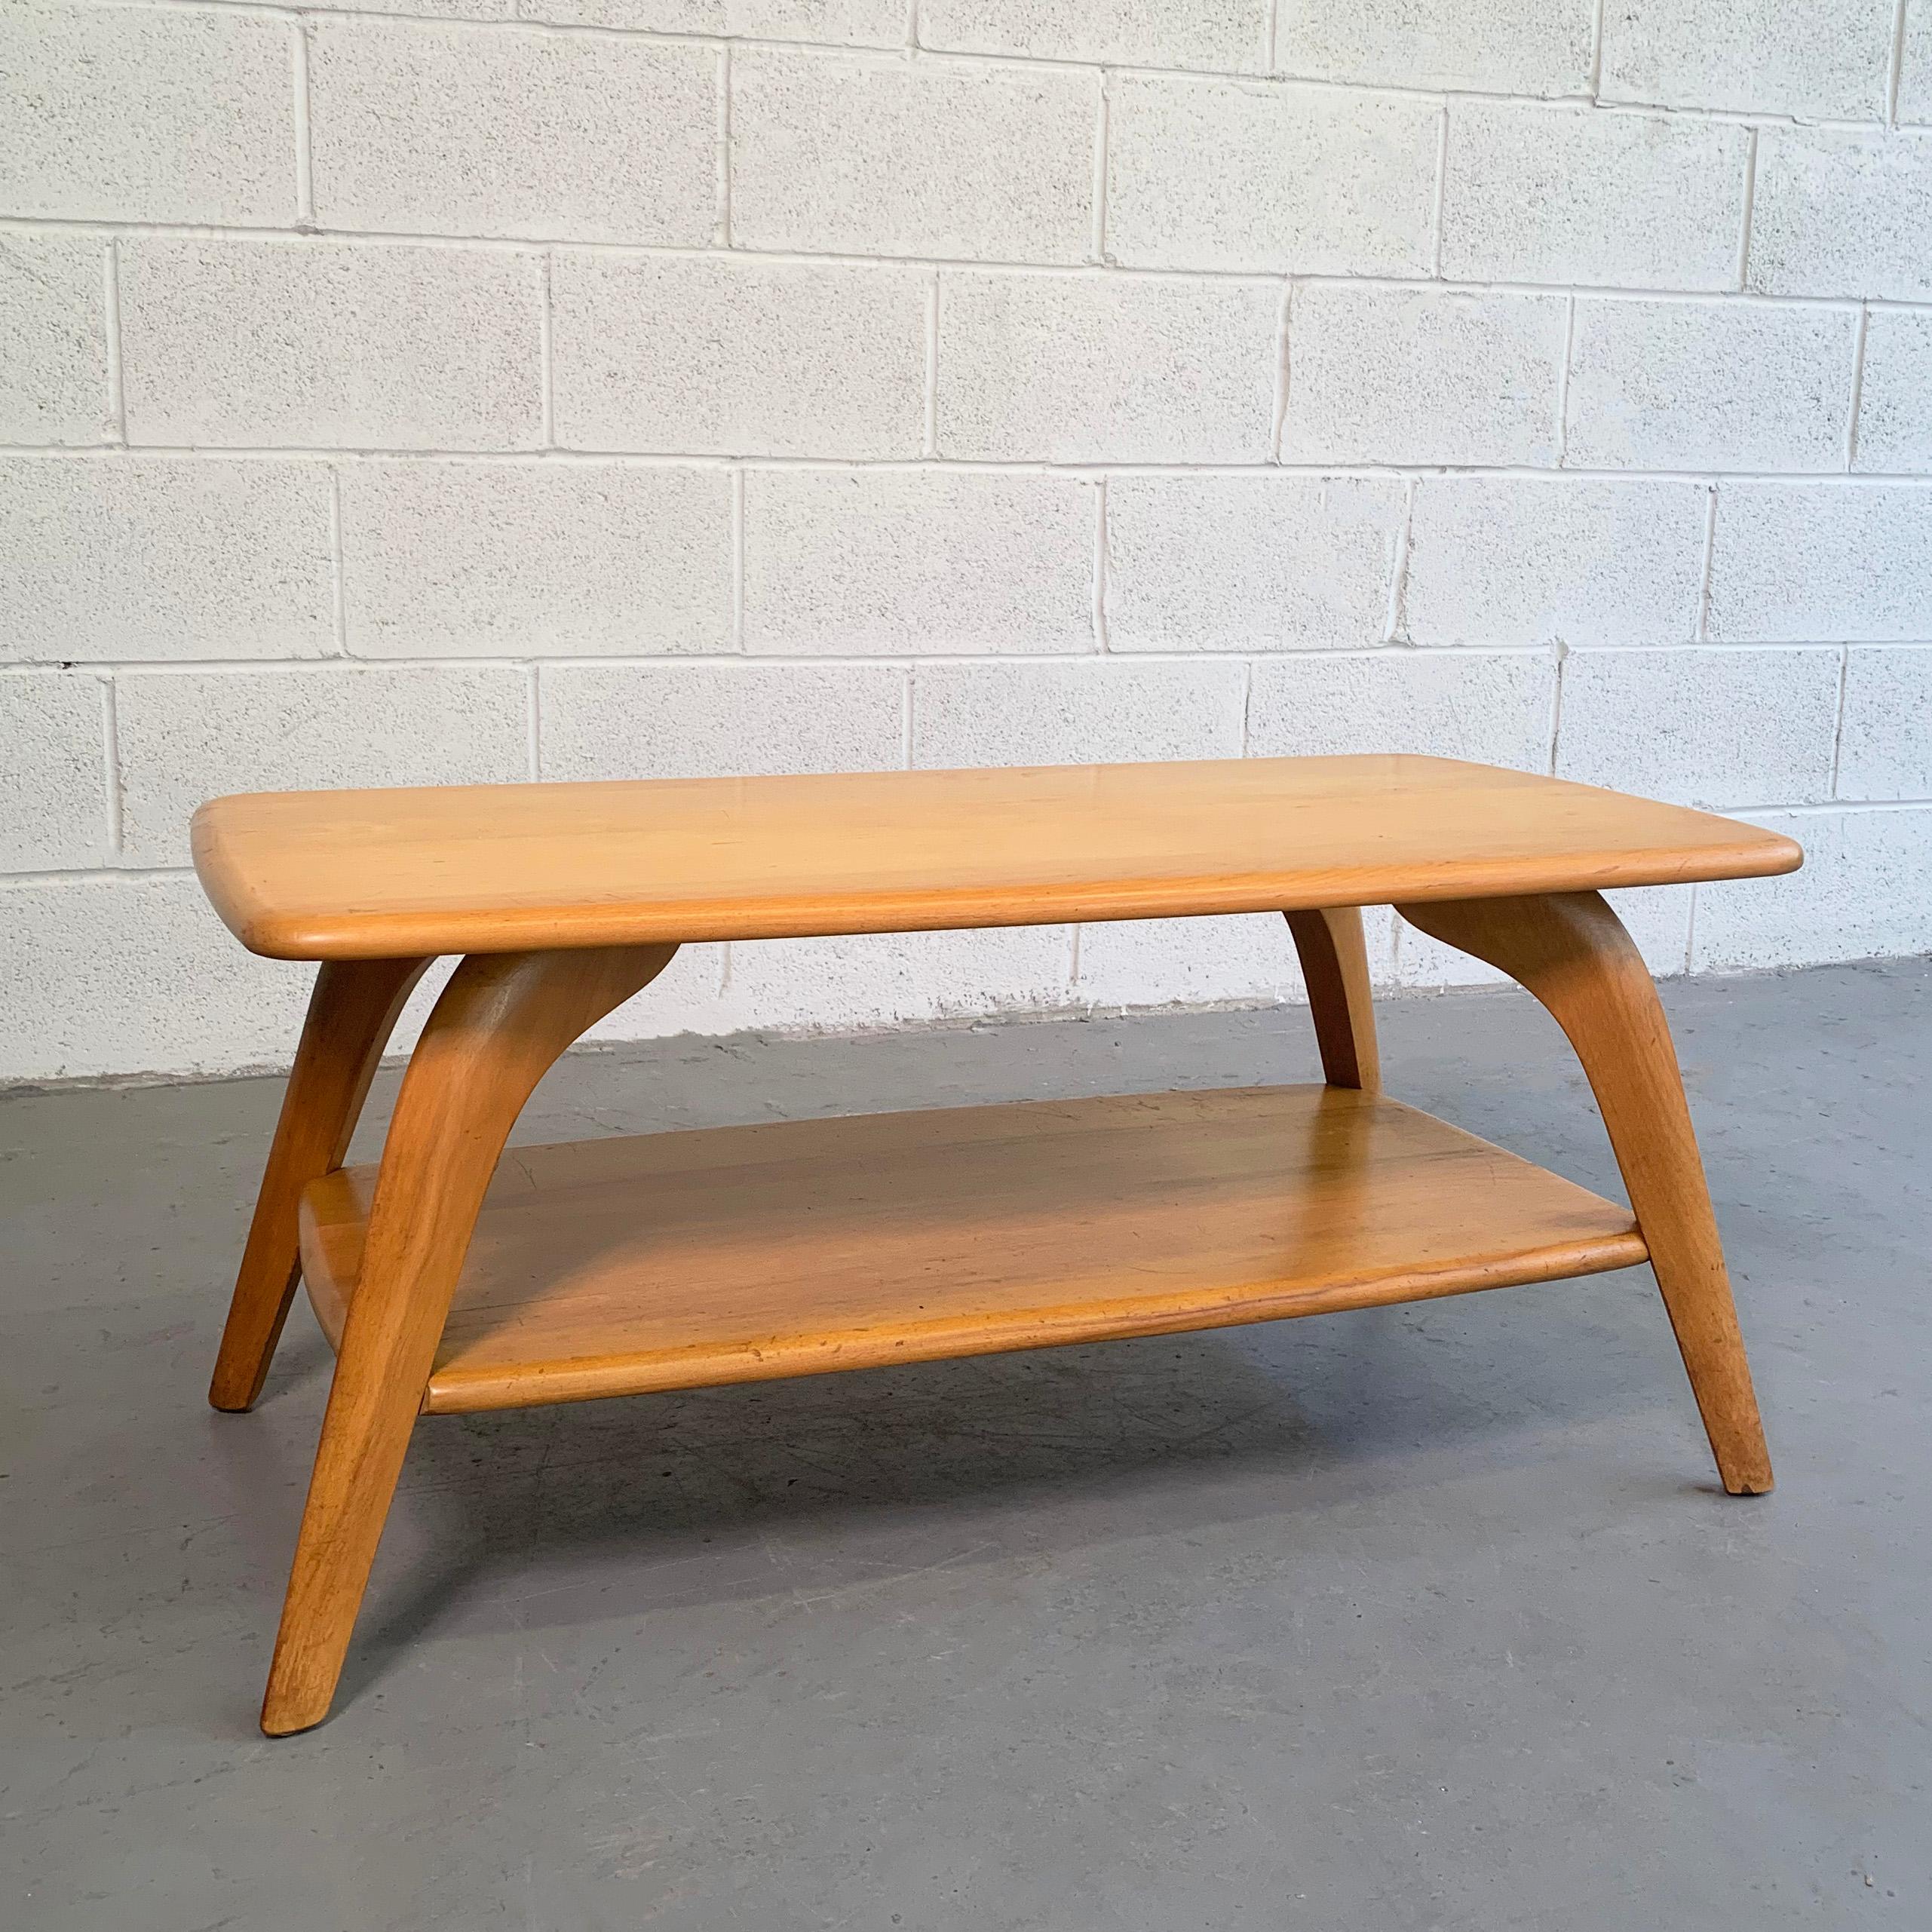 Mid-Century Modern, blonde maple, tiered coffee or side table by Heywood Wakefield.